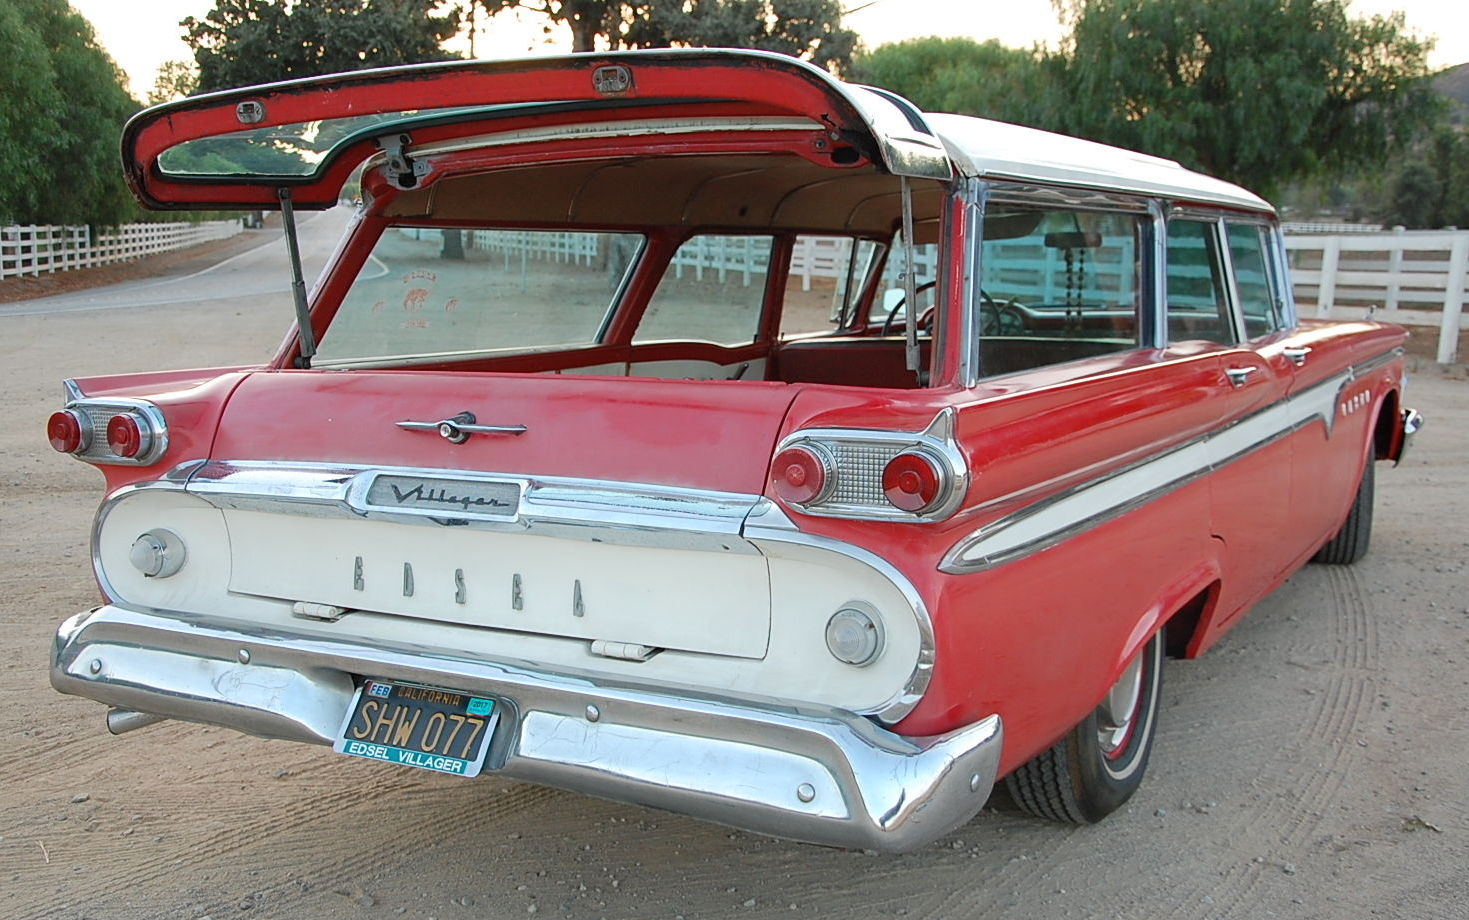 Controversial Classic: 1959 Edsel Villager.